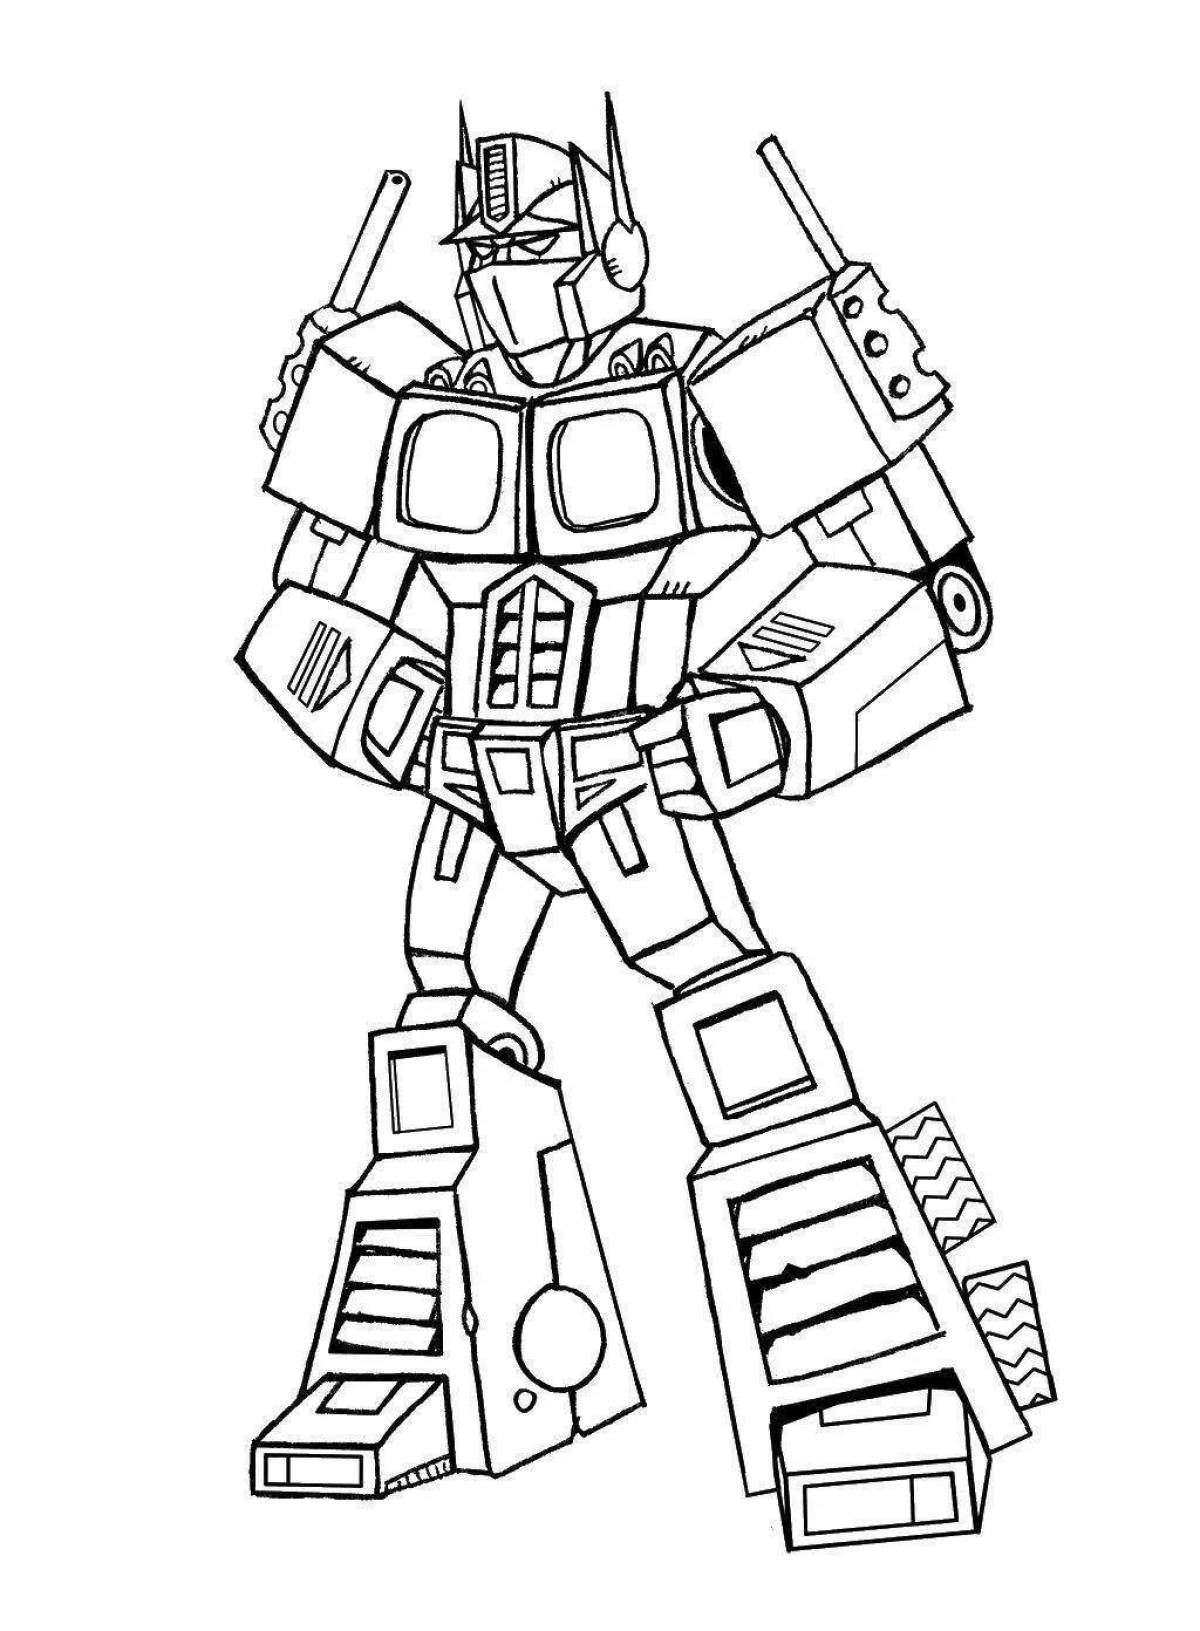 Outstanding robot coloring pages for 5-7 year olds